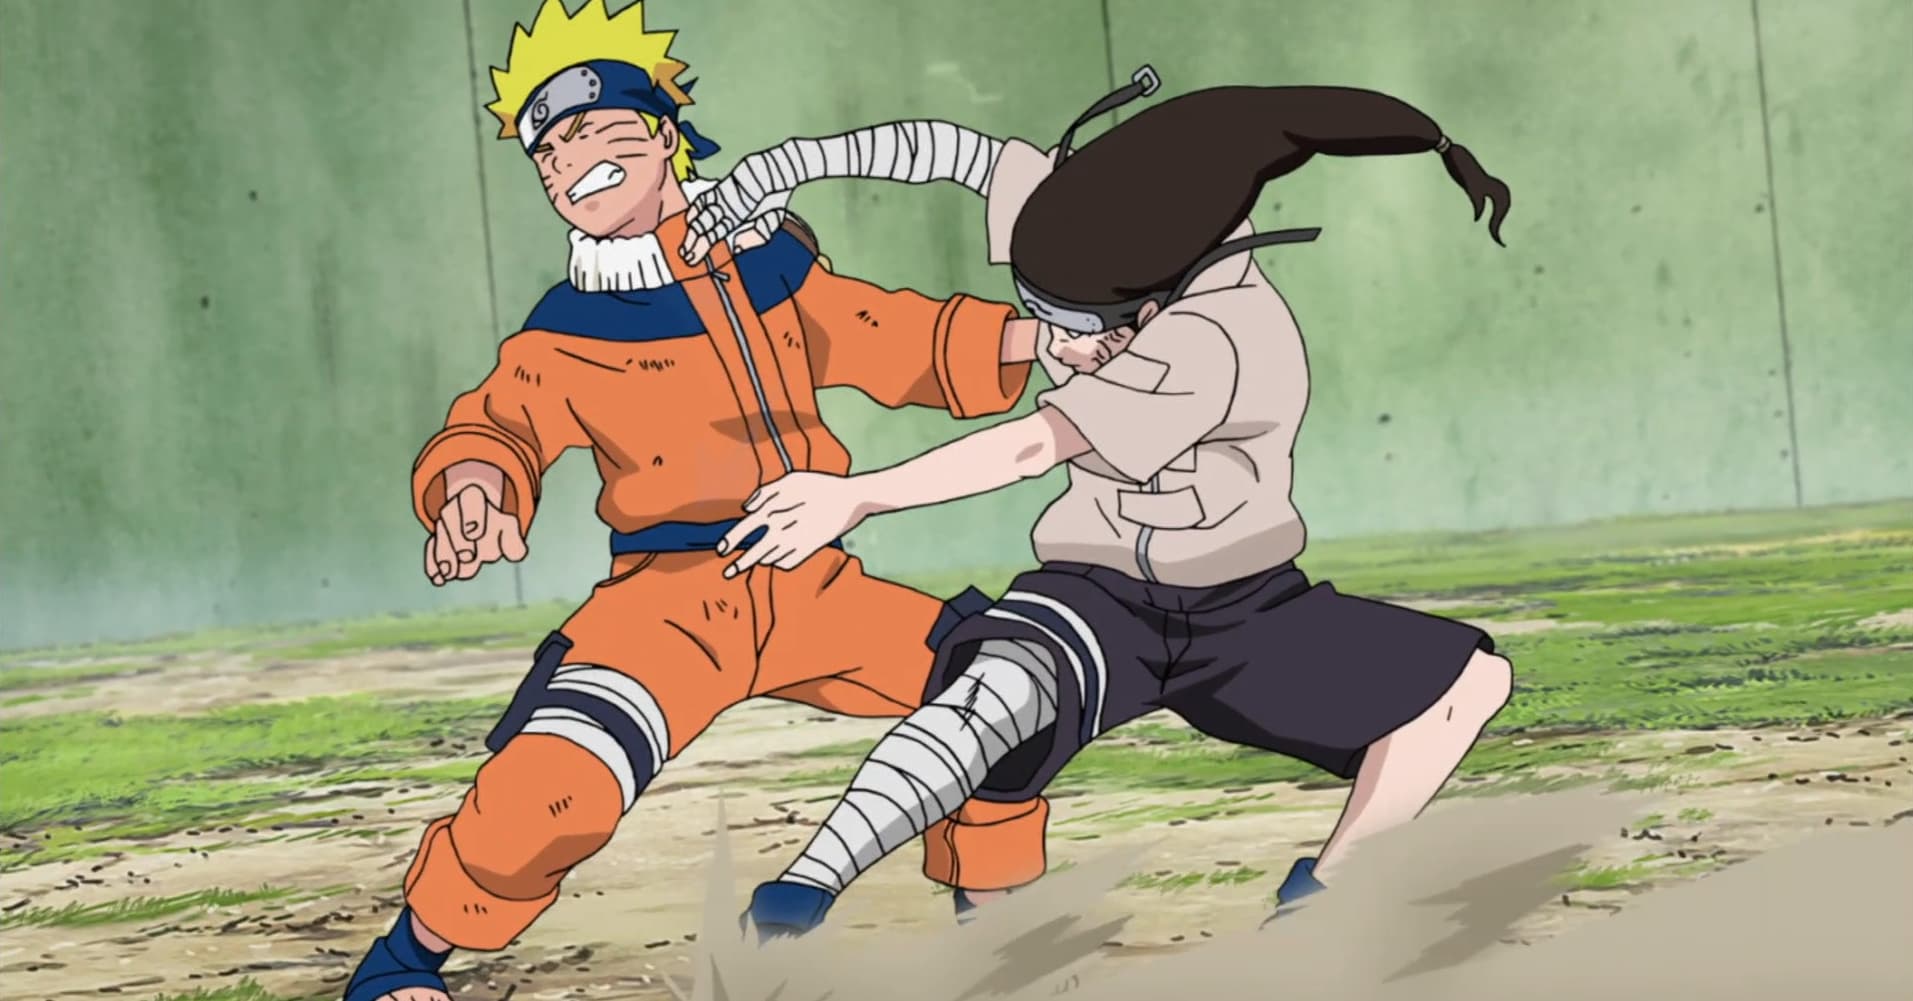 Every Fight From The Chunin Exams In Naruto, Ranked Best to Worst